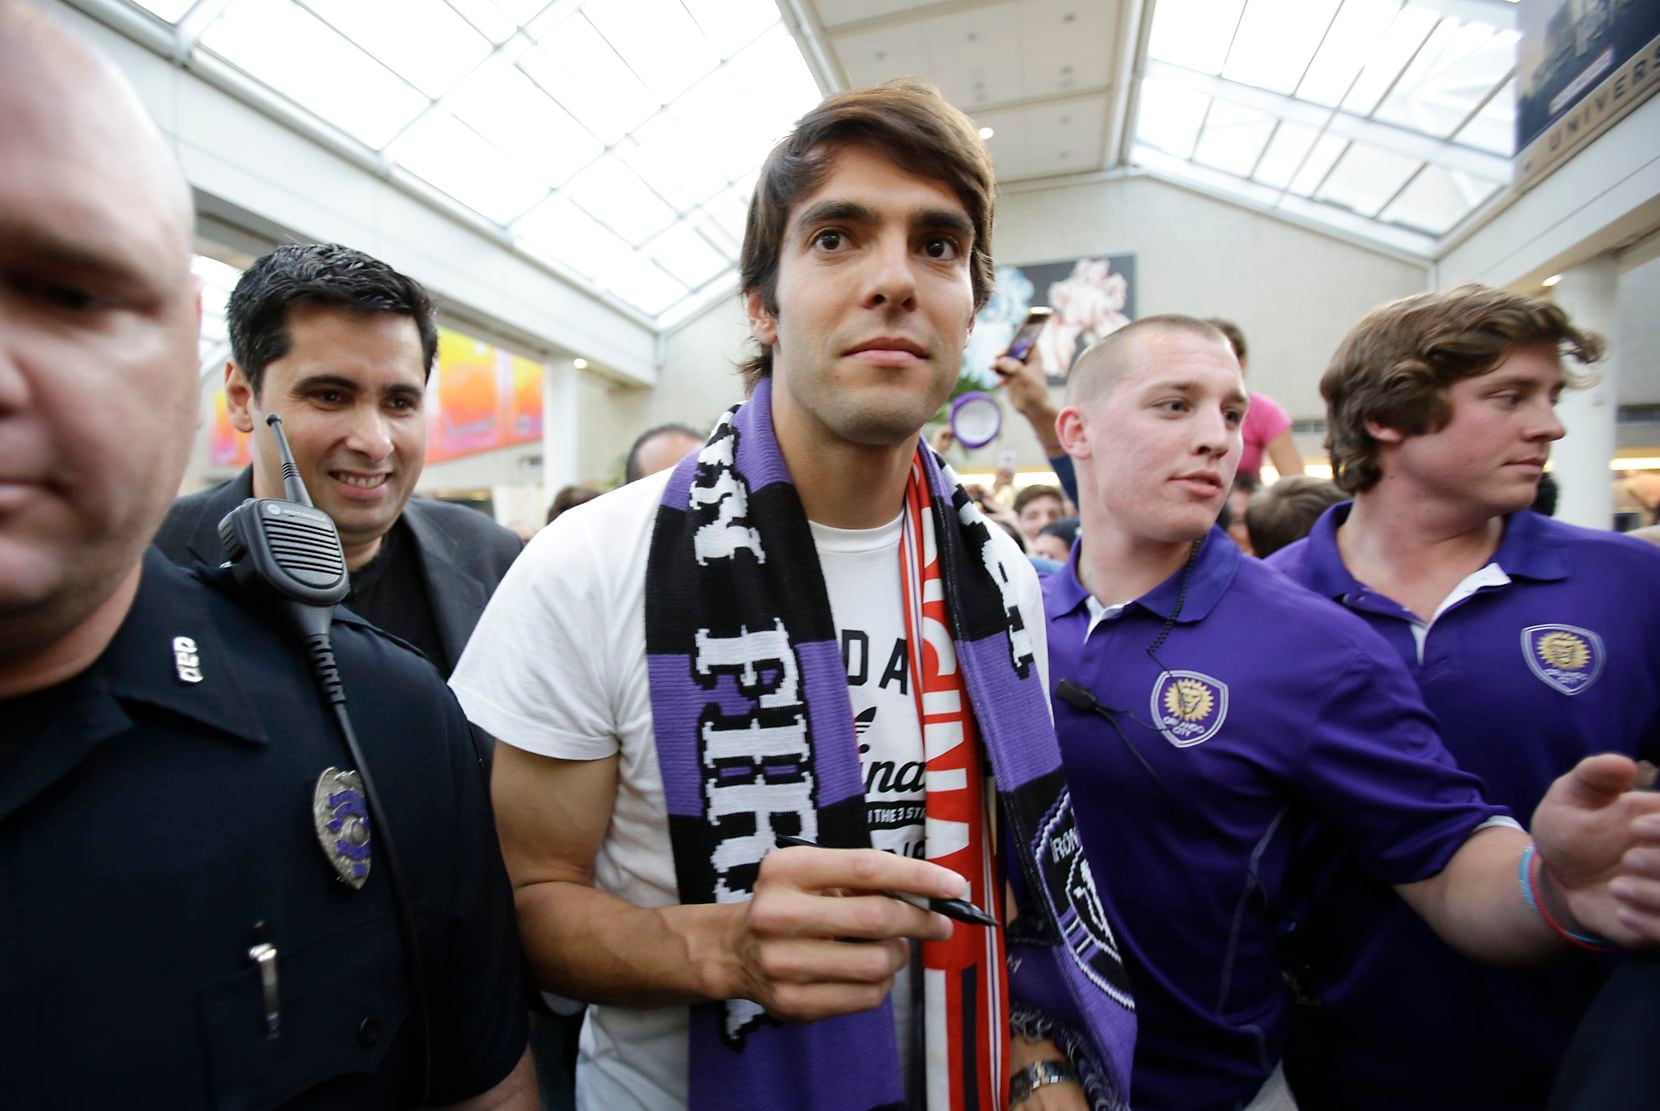 Brazilian soccer star Kaka made more than $7 million in 2017 for Orlando City. He is pictured here in 2014, when he joined MLS from AC Milan.